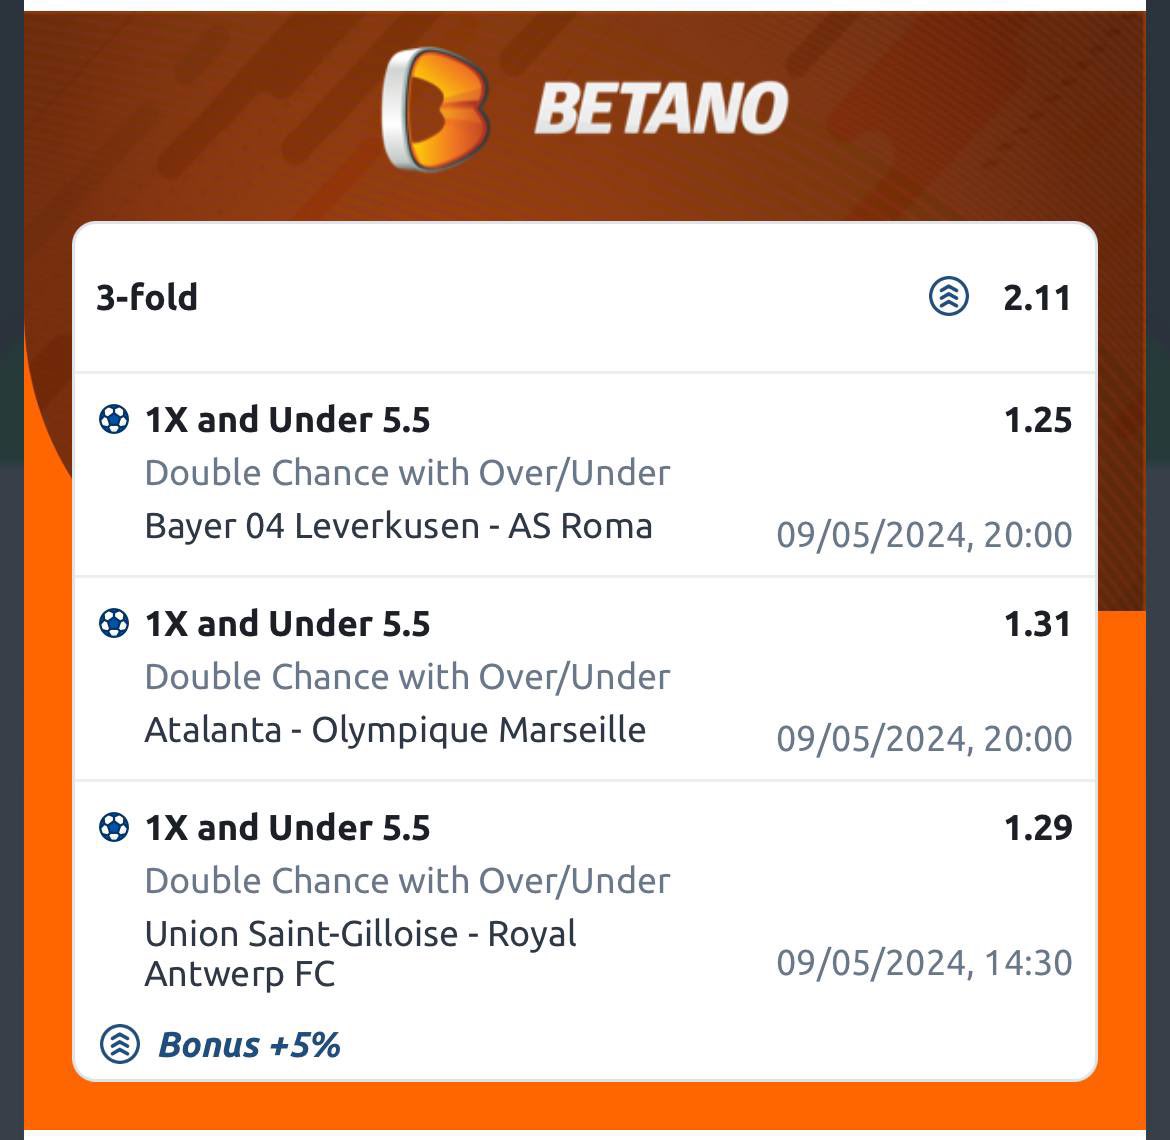 2 odds only on BETANO (+18) Code: JHLID312 Register here: bit.ly/4cr1tcd Promo code: CINDY Play responsibly 🤲🏻